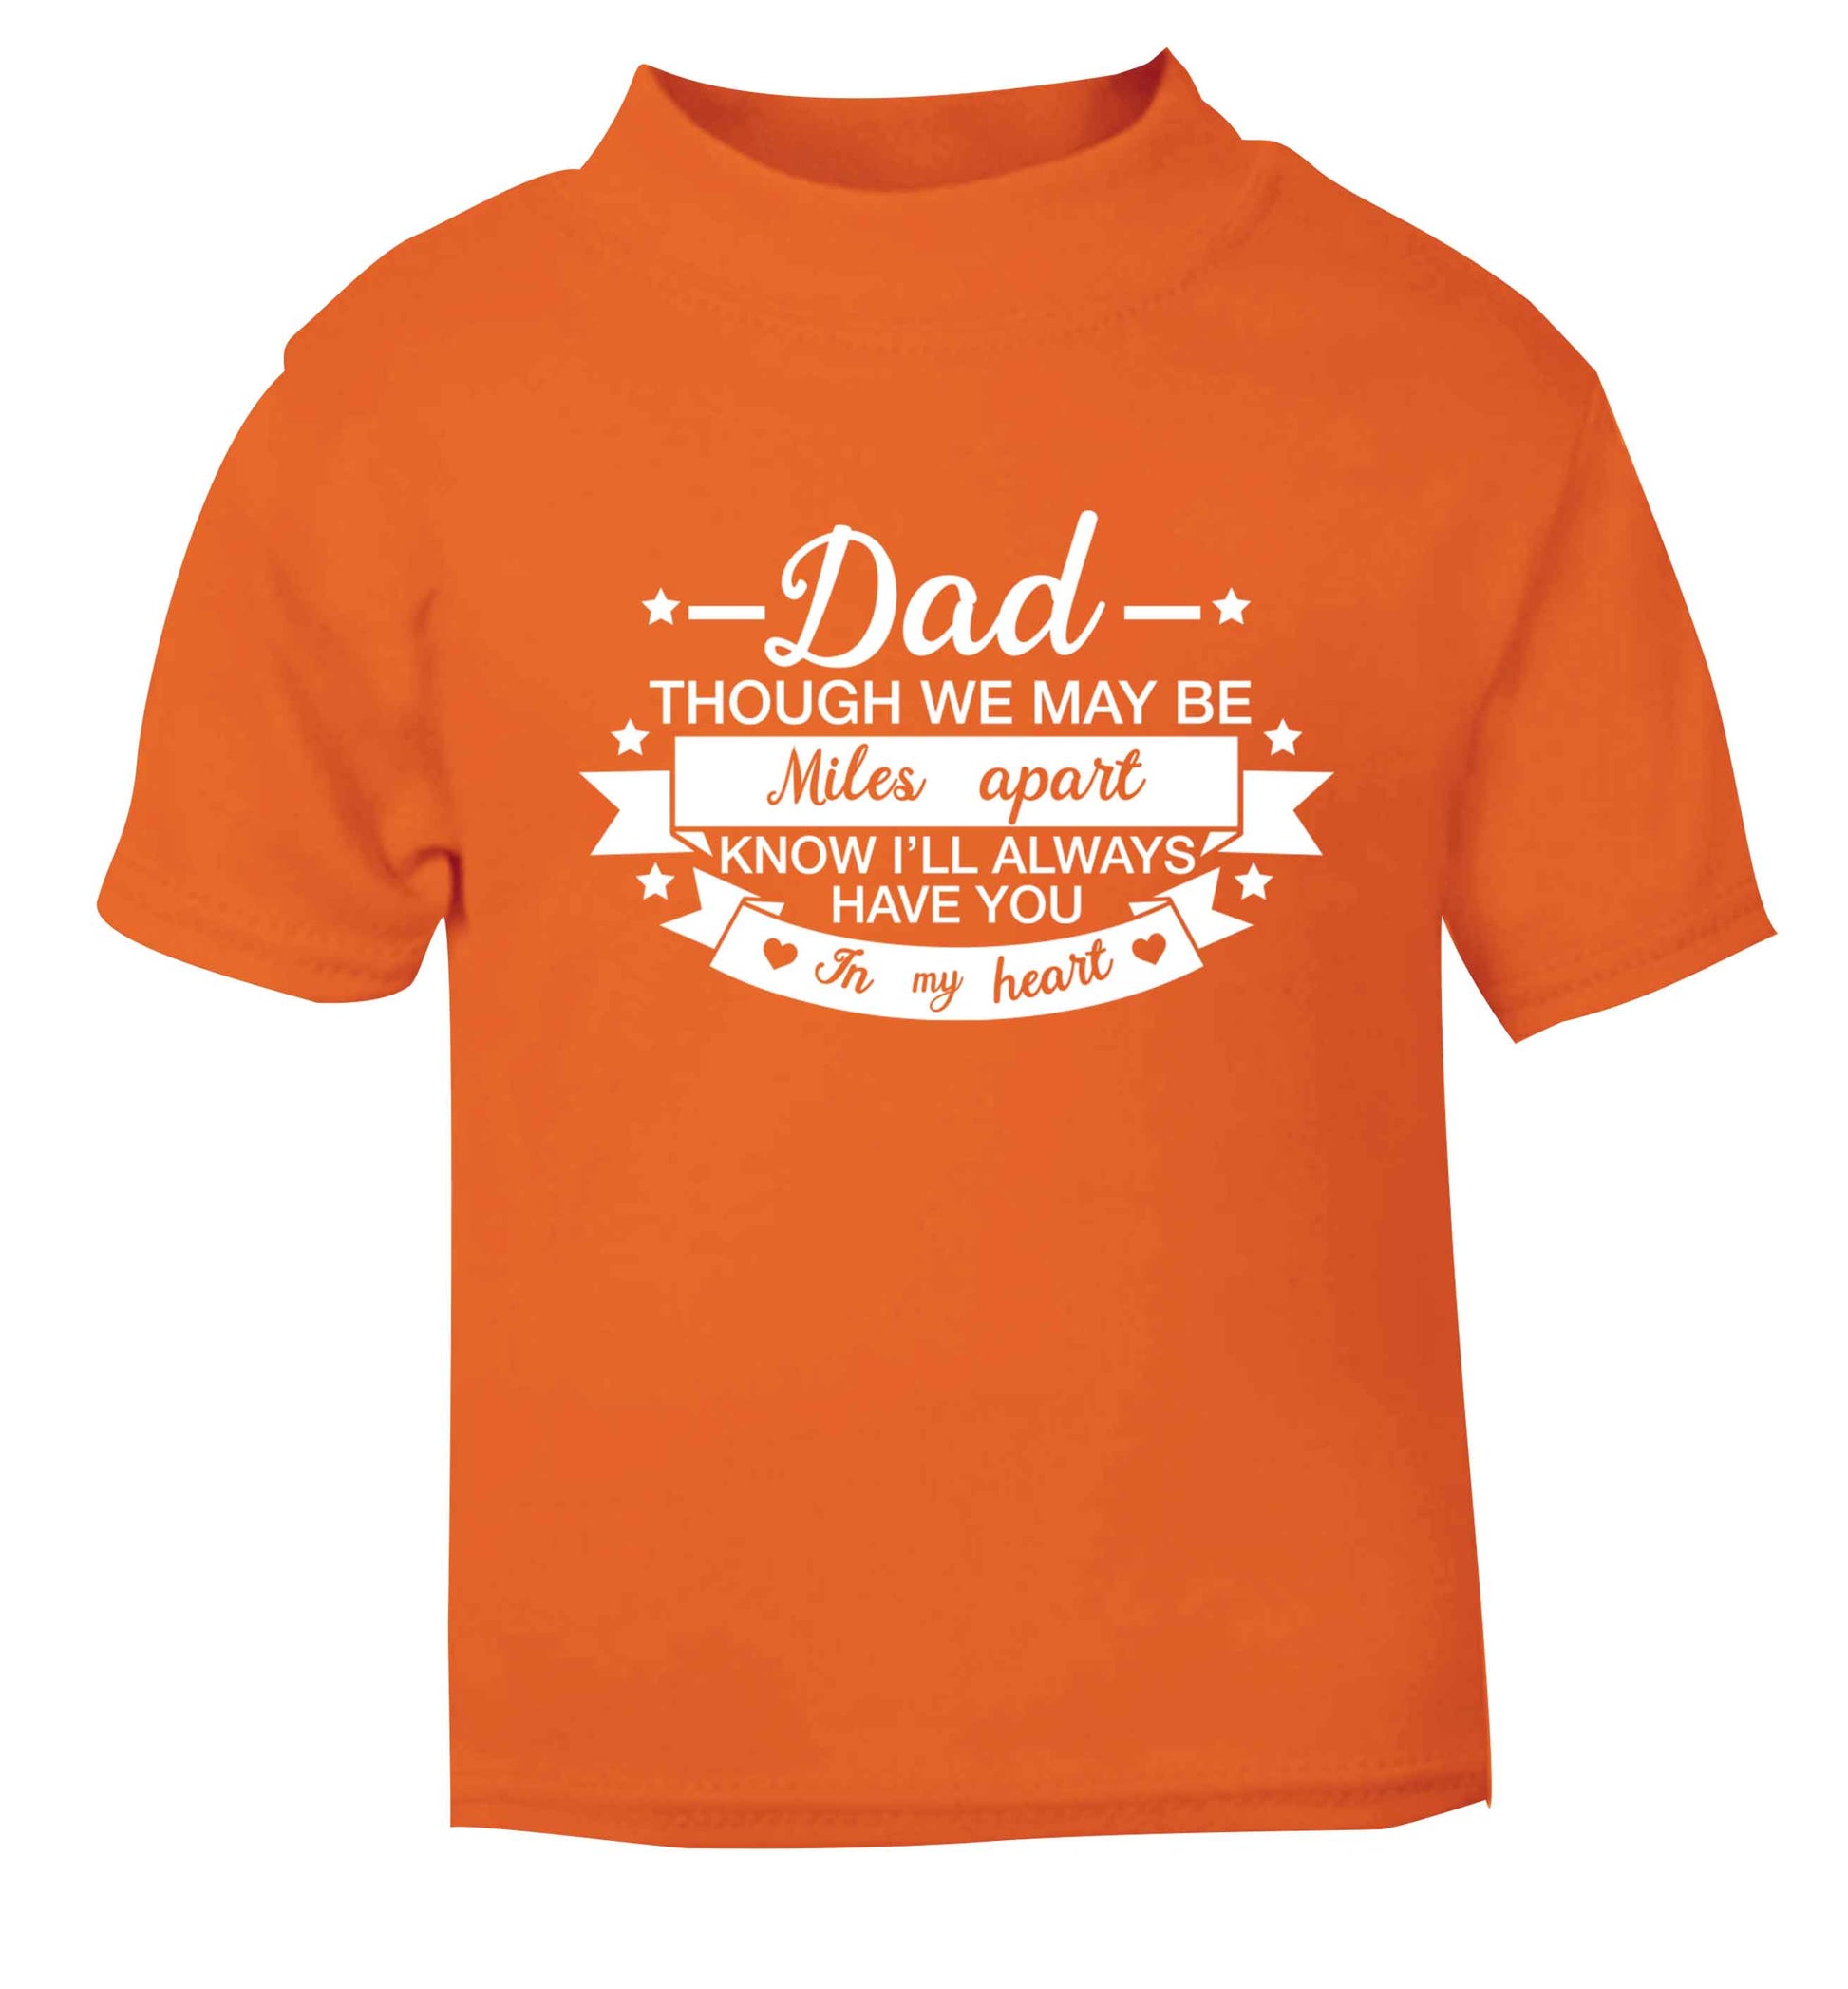 Dad though we are miles apart know I'll always have you in my heart orange baby toddler Tshirt 2 Years